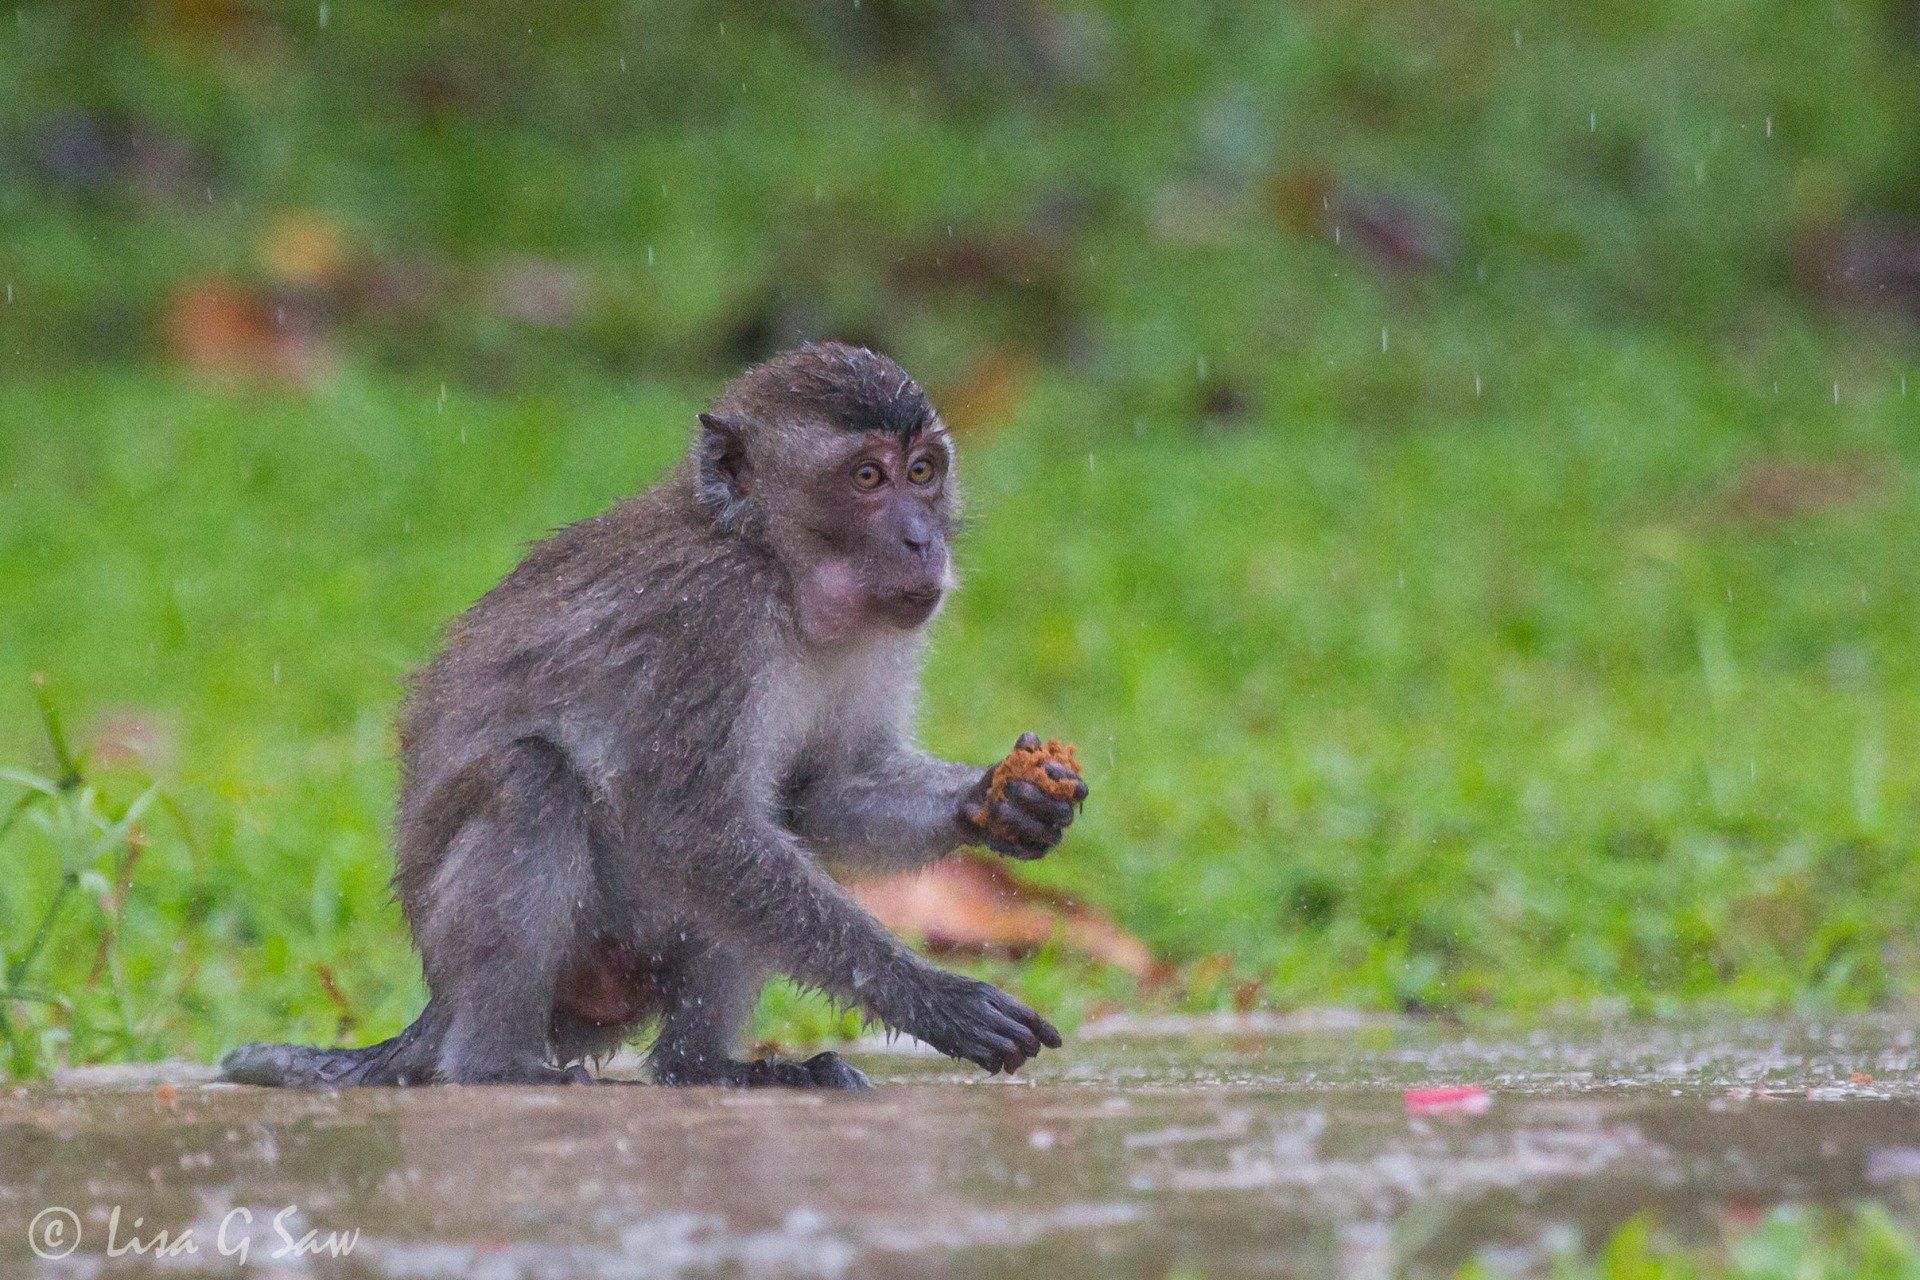 Long-Tailed Macaque eating chocolate sponge in the rain